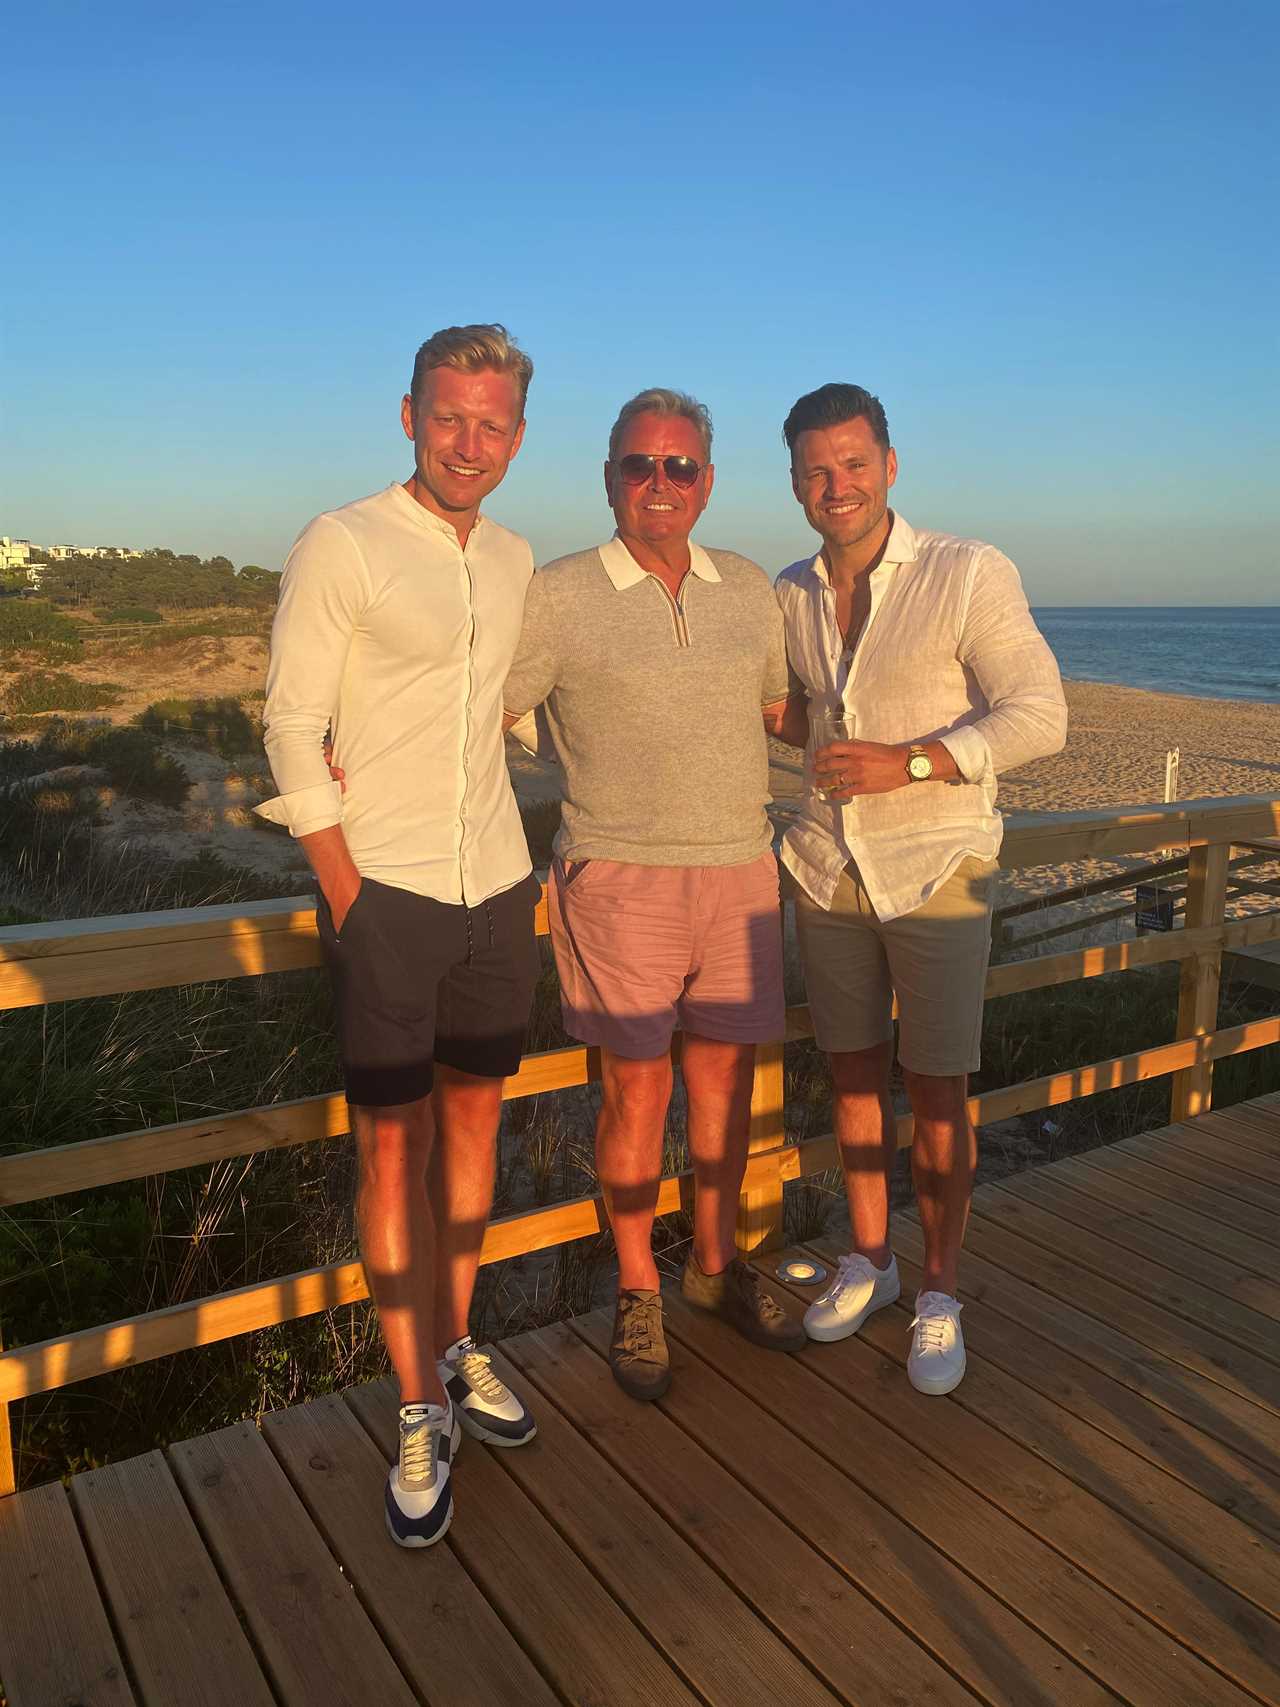 Mark Wright reveals exciting new TV job with brother and dad – but ‘can’t wait’ to return to £3.5m mega mansion